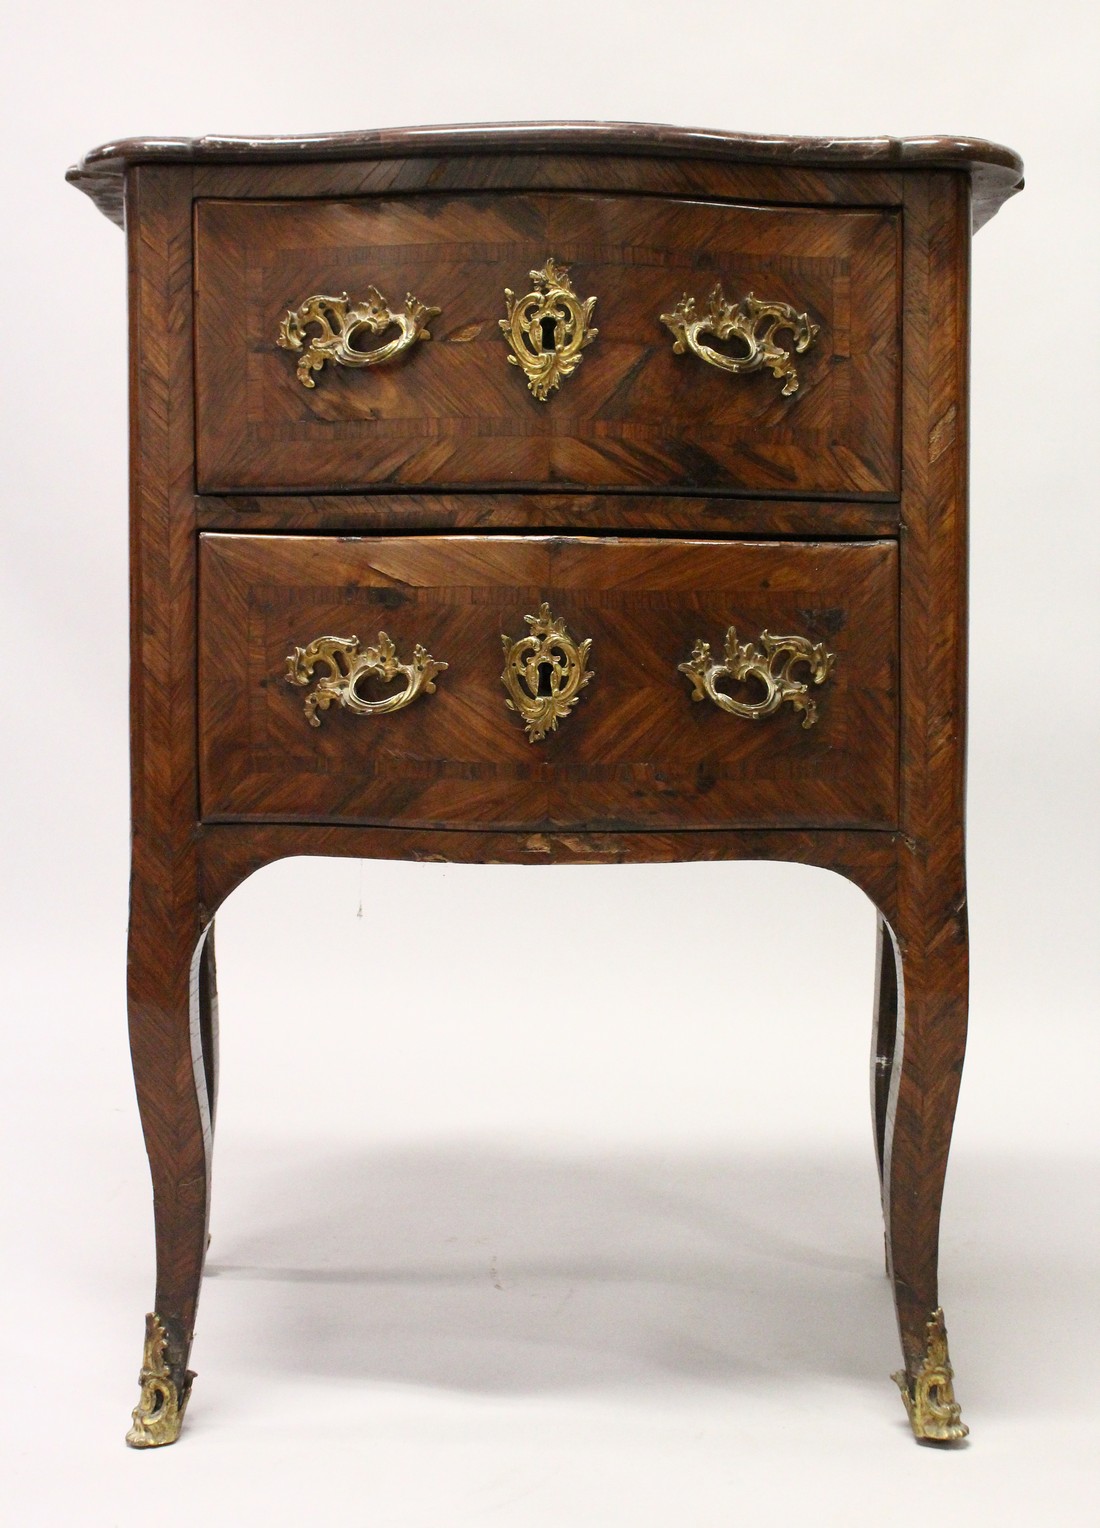 AN 18TH CENTURY FRENCH KINGWOOD, ORMOLU AND MARBLE TWO DRAWER SERPENTINE PETIT COMMODE, the shaped - Image 2 of 8